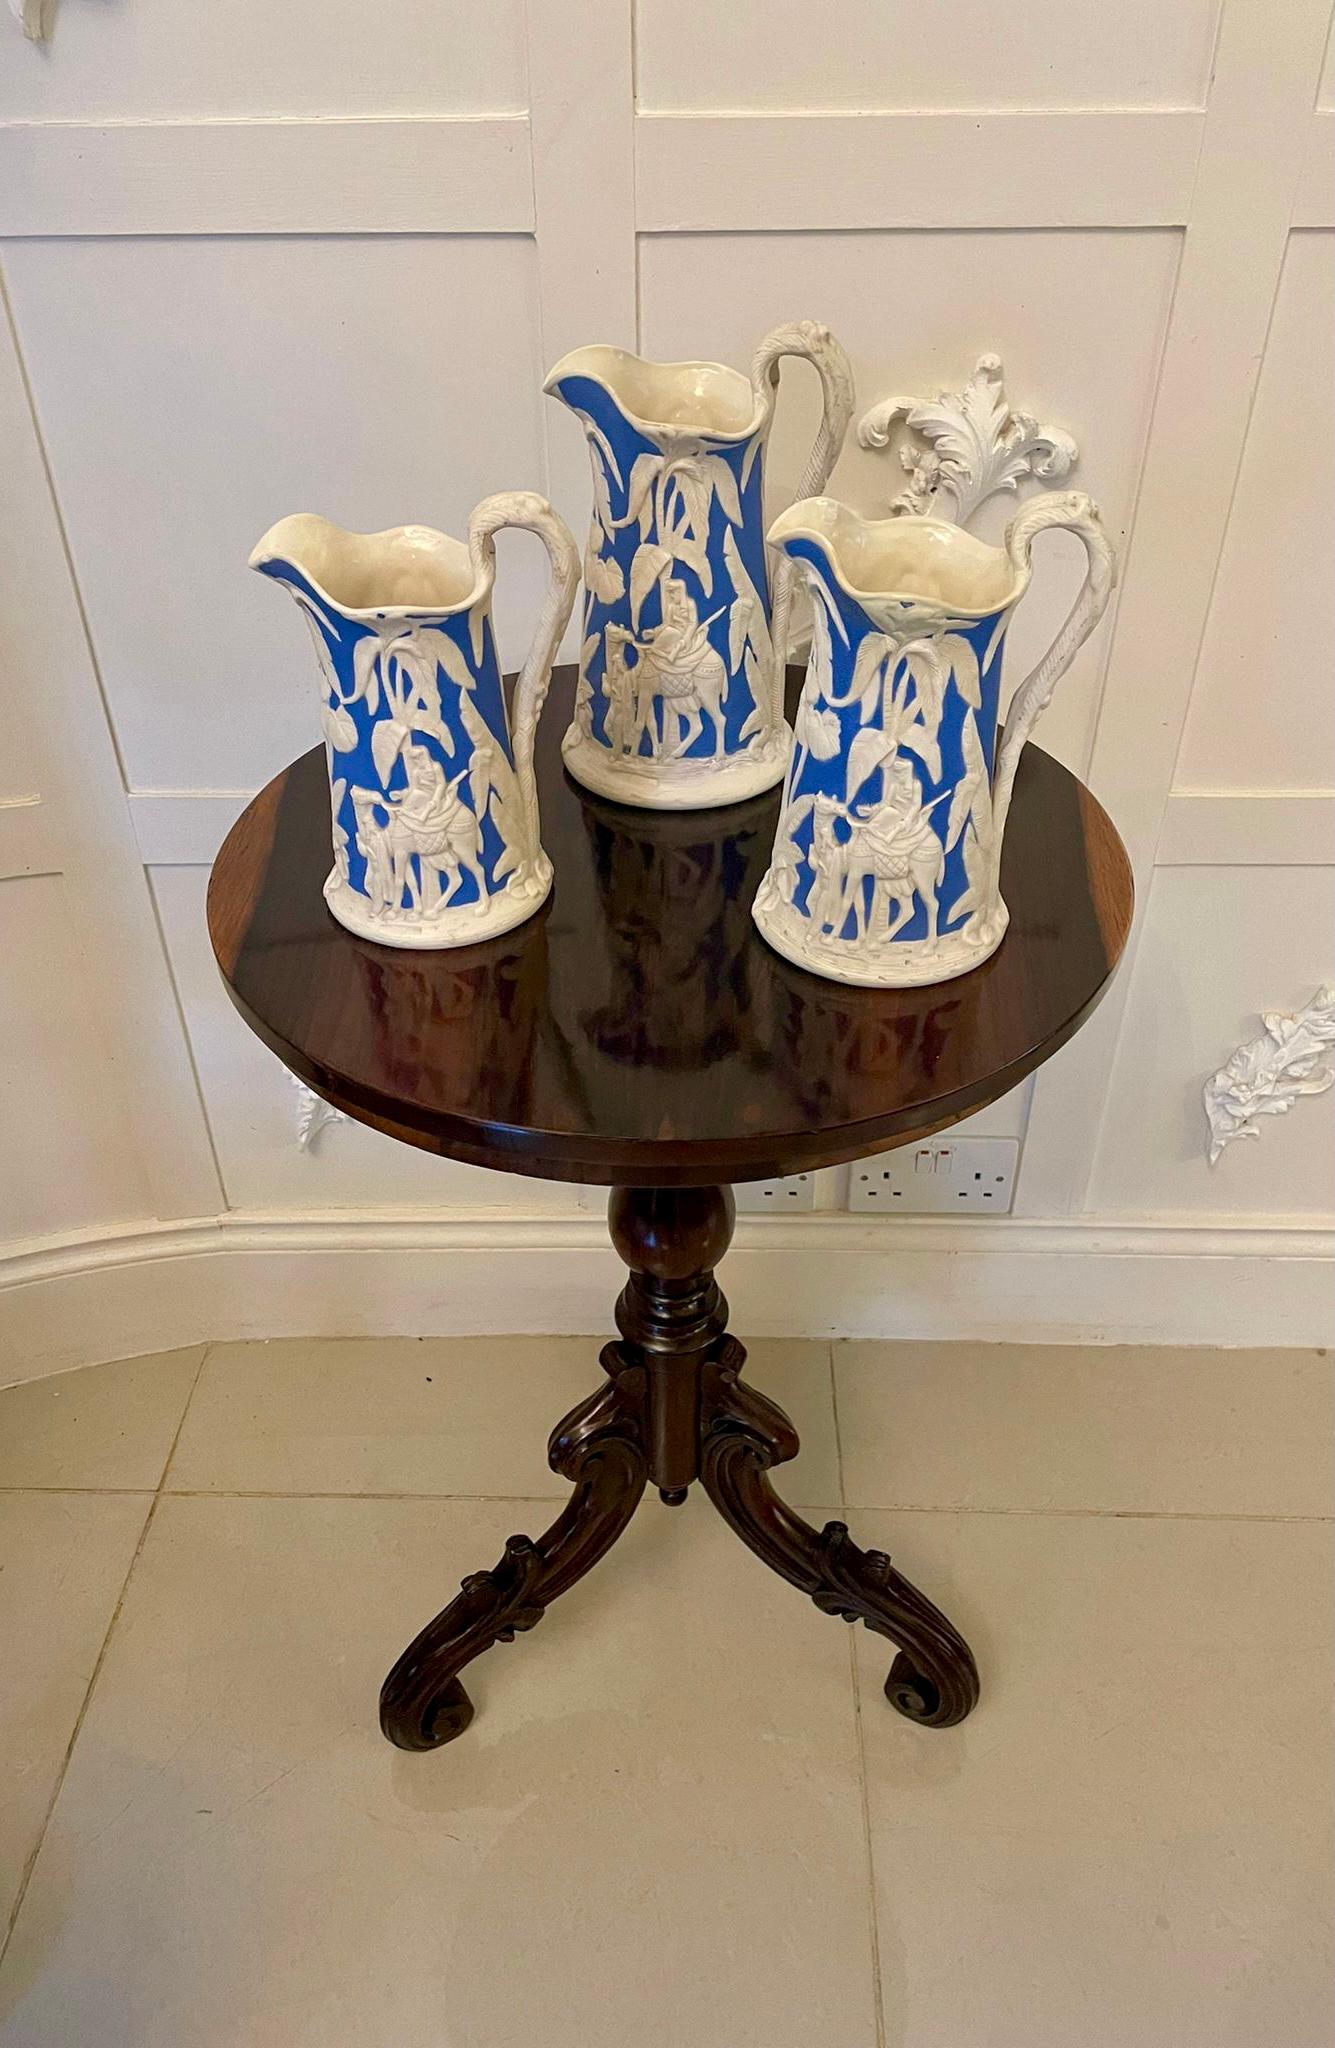 Set of three antique Victorian blue and white jugs by the prestigious Samuel Alcock having shaped tops and handles decorated with trees and gentlemen riding camels in the desert. 

Very decorative examples [minor damage as shown in